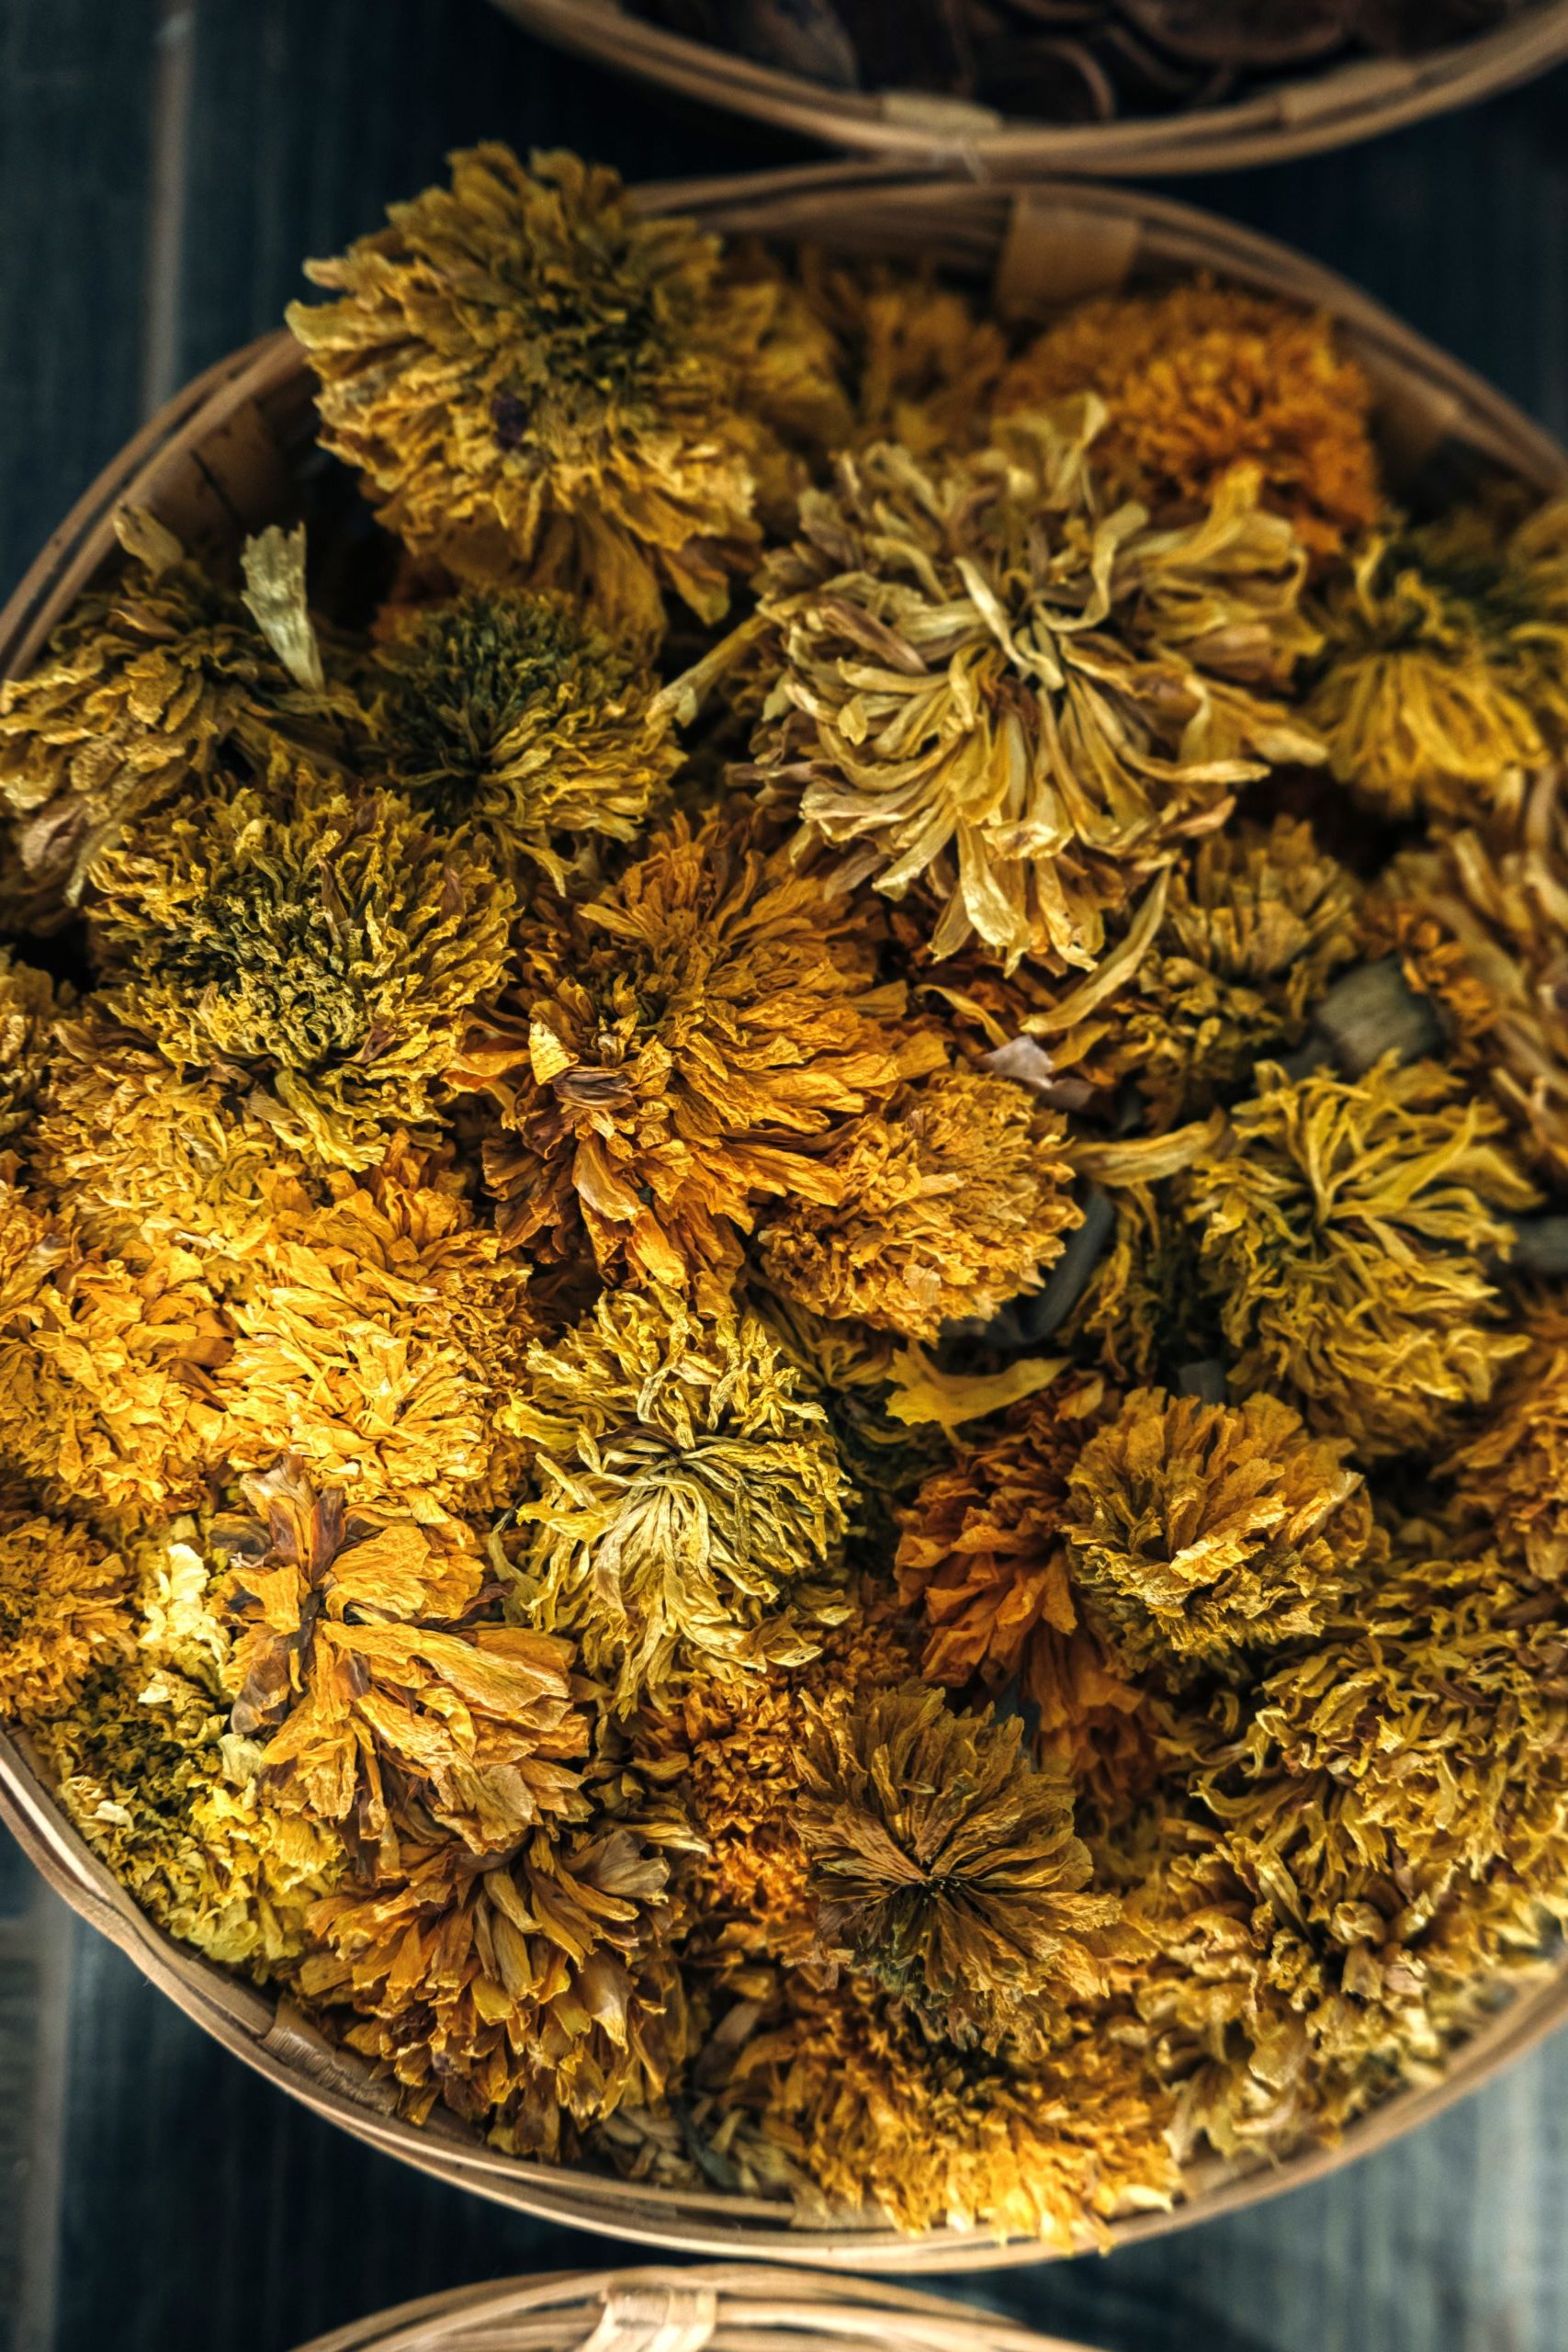 Looking down into basket of dried flowers